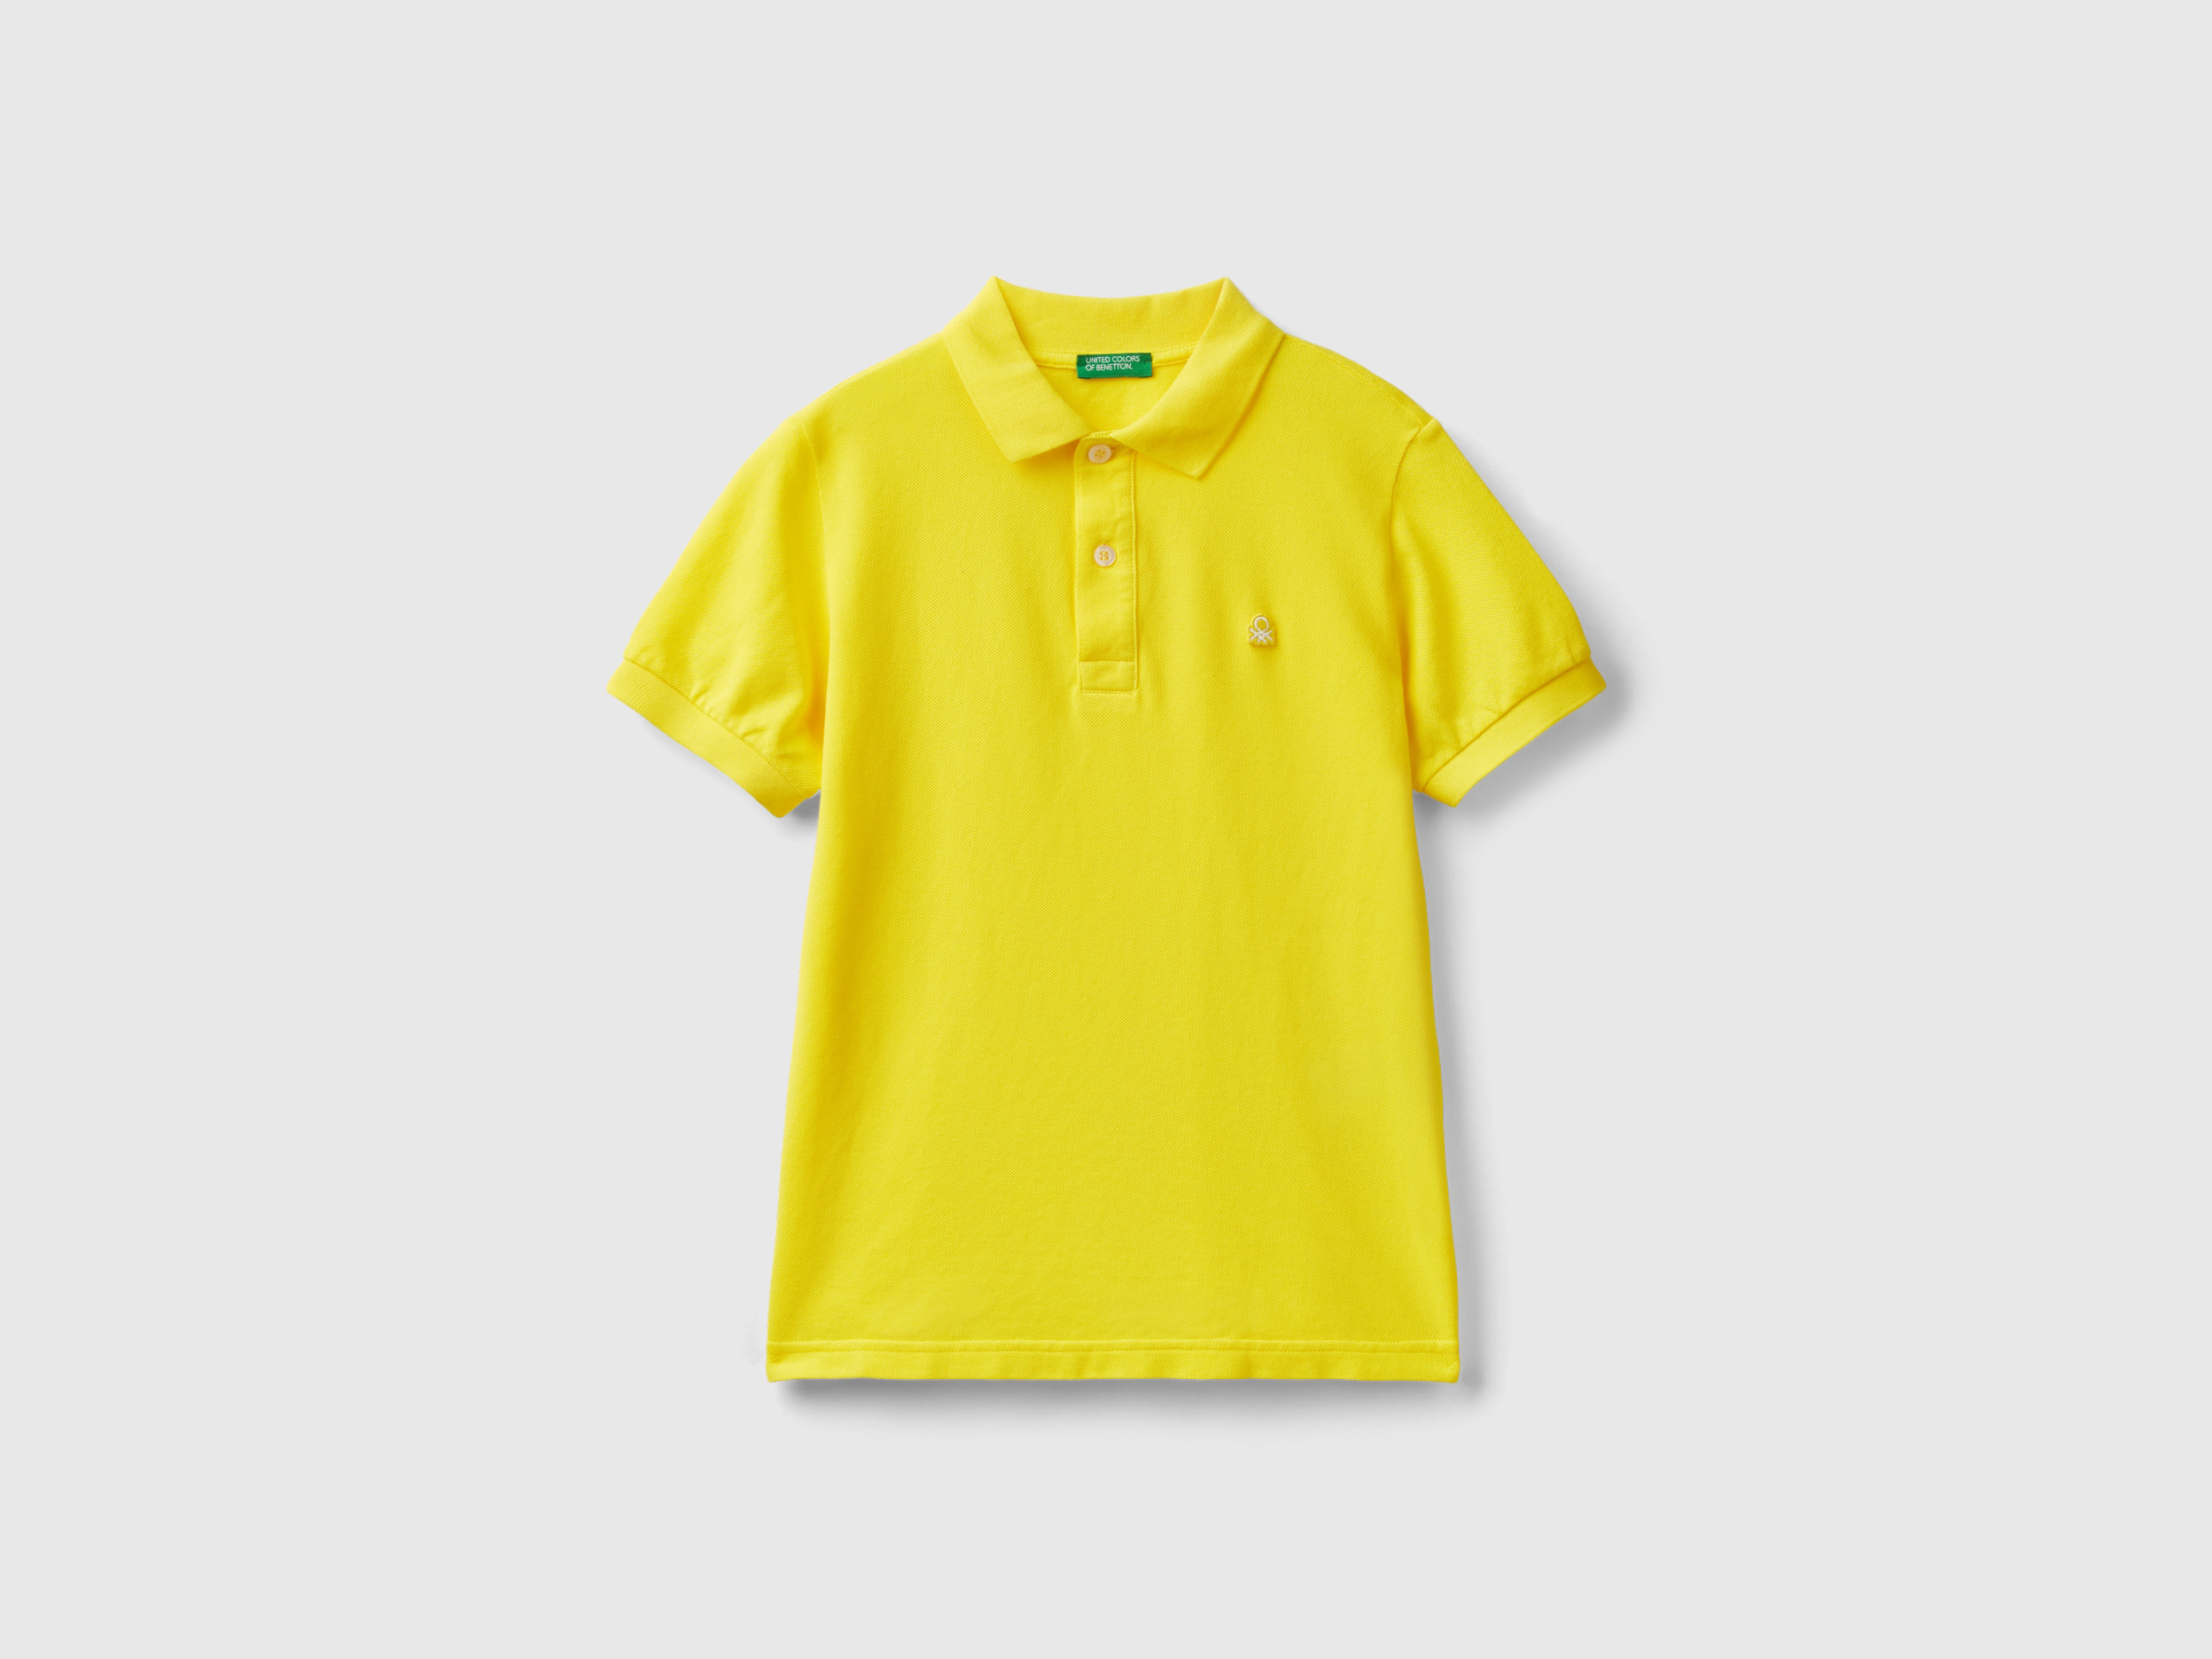 Image of Benetton, Slim Fit Polo In 100% Organic Cotton, size XL, Yellow, Kids